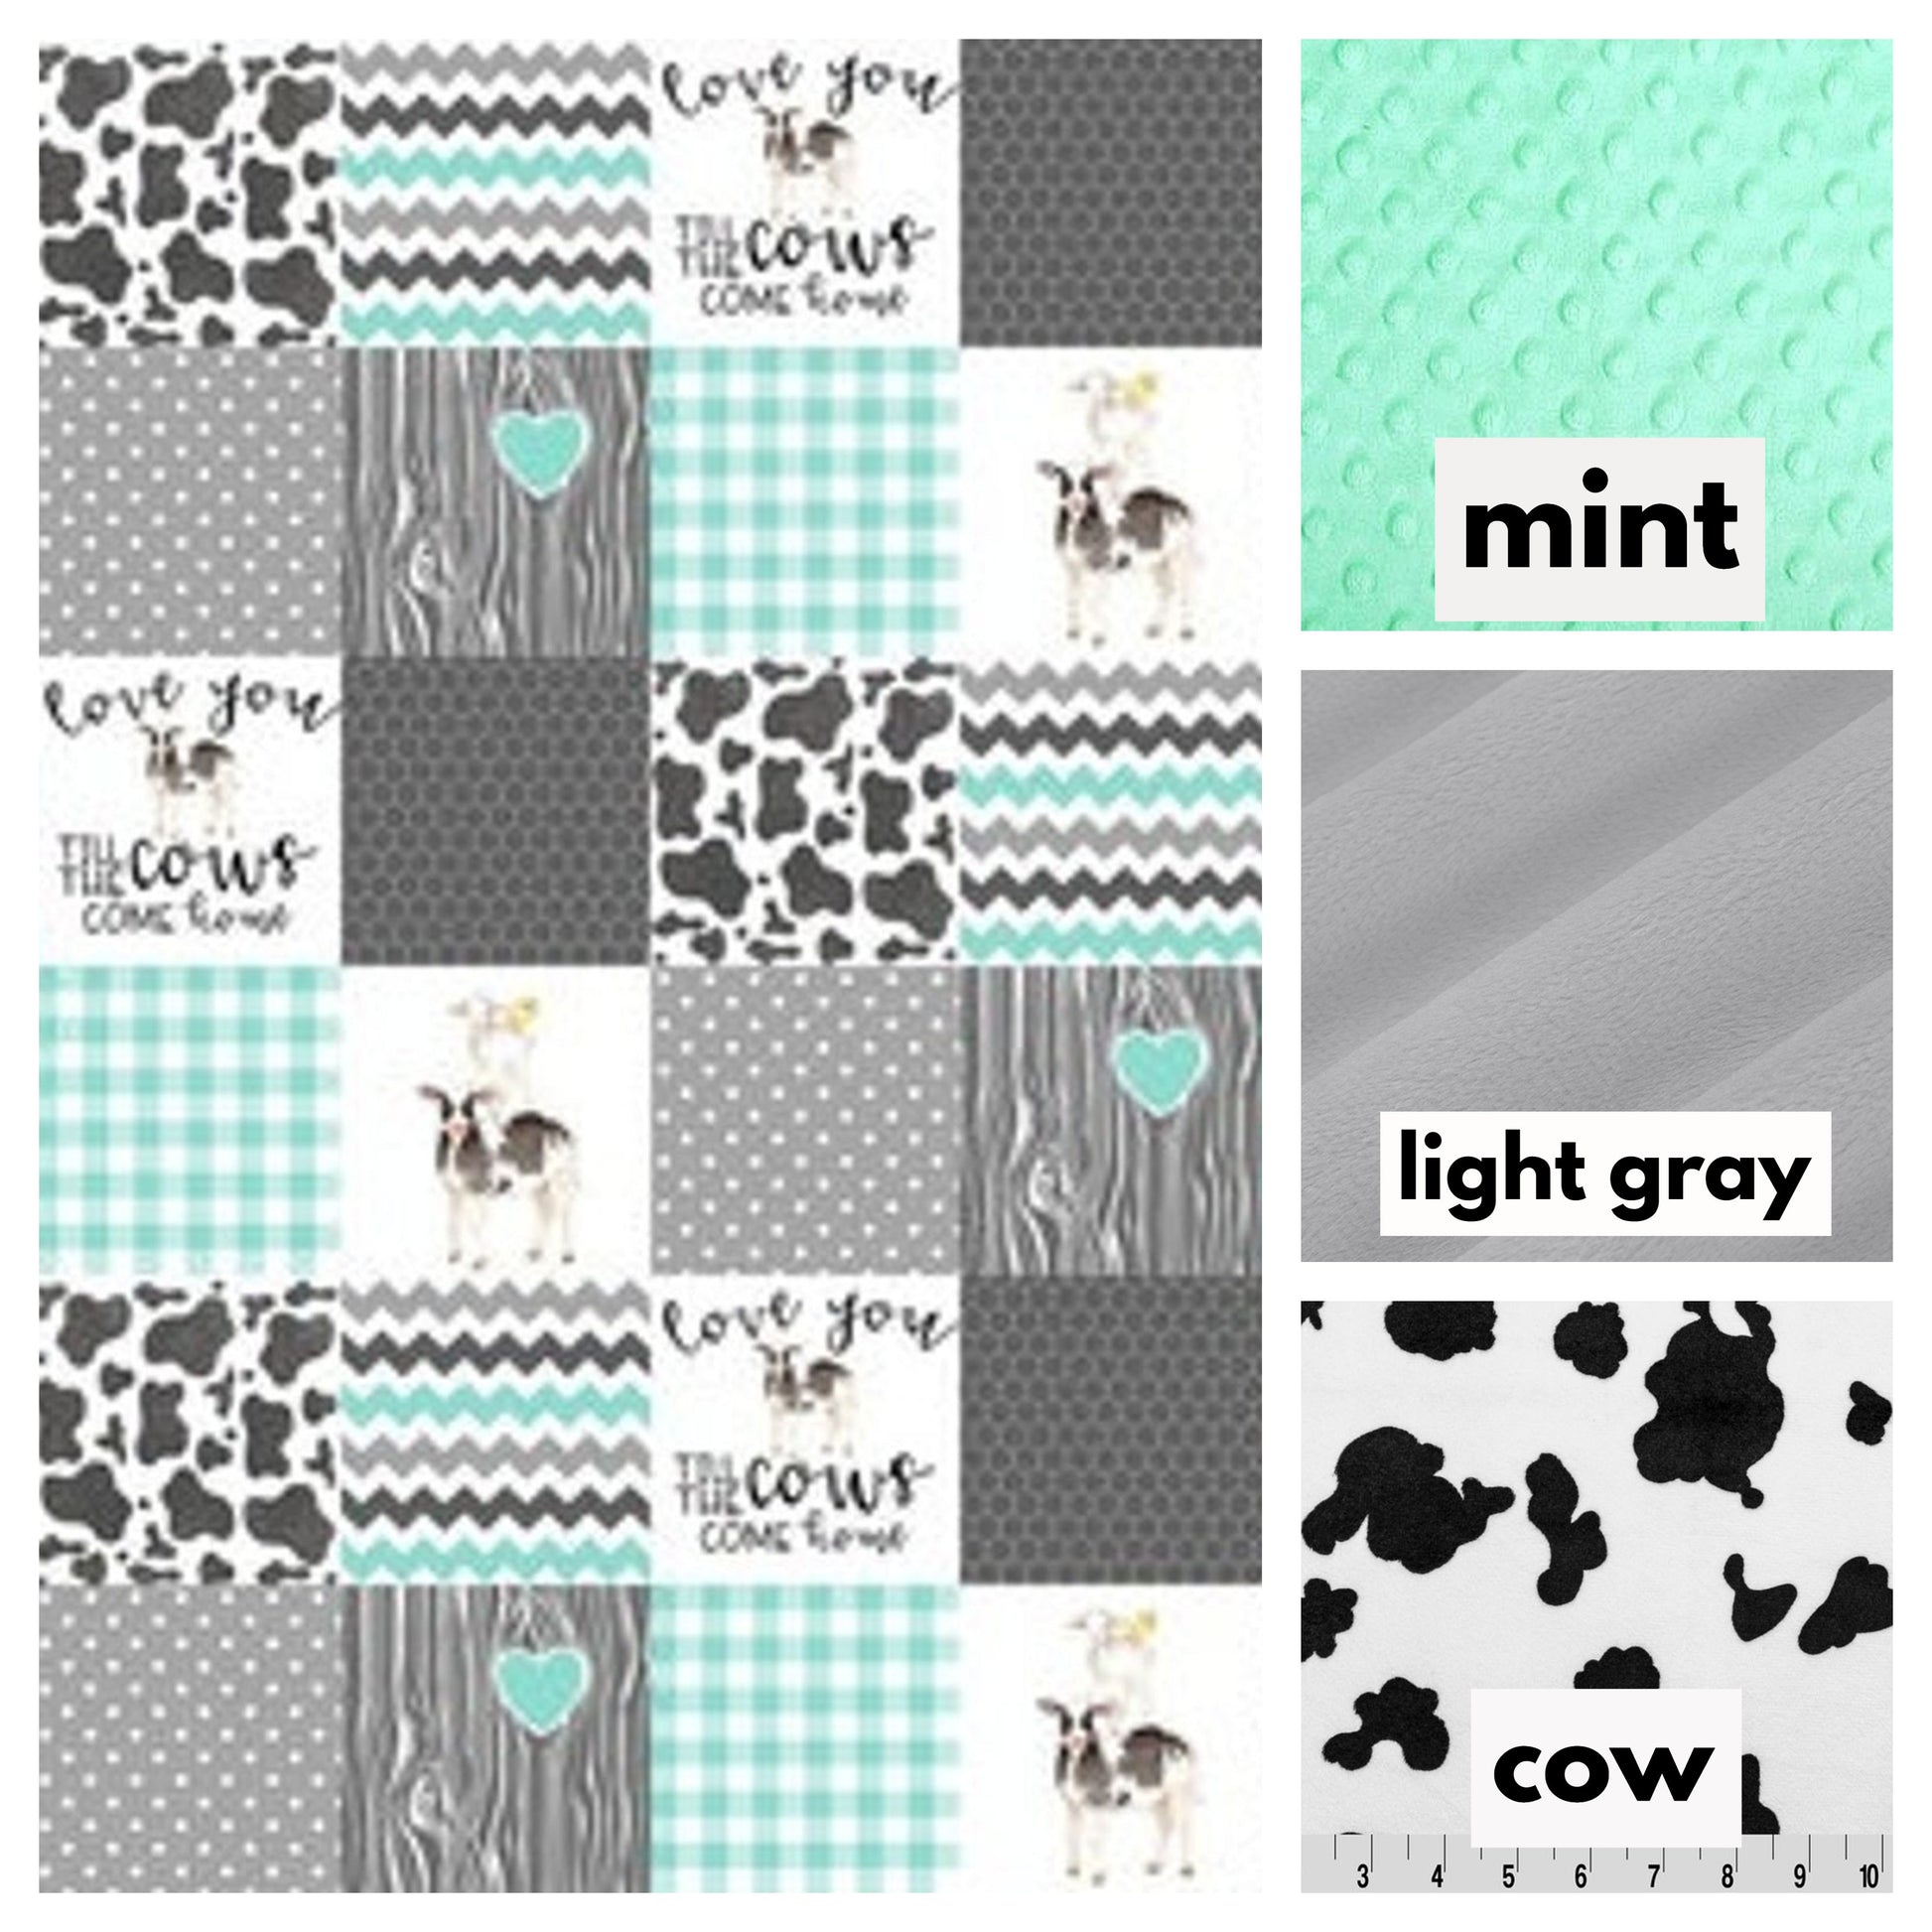 minky colors available - mint, gray & cow